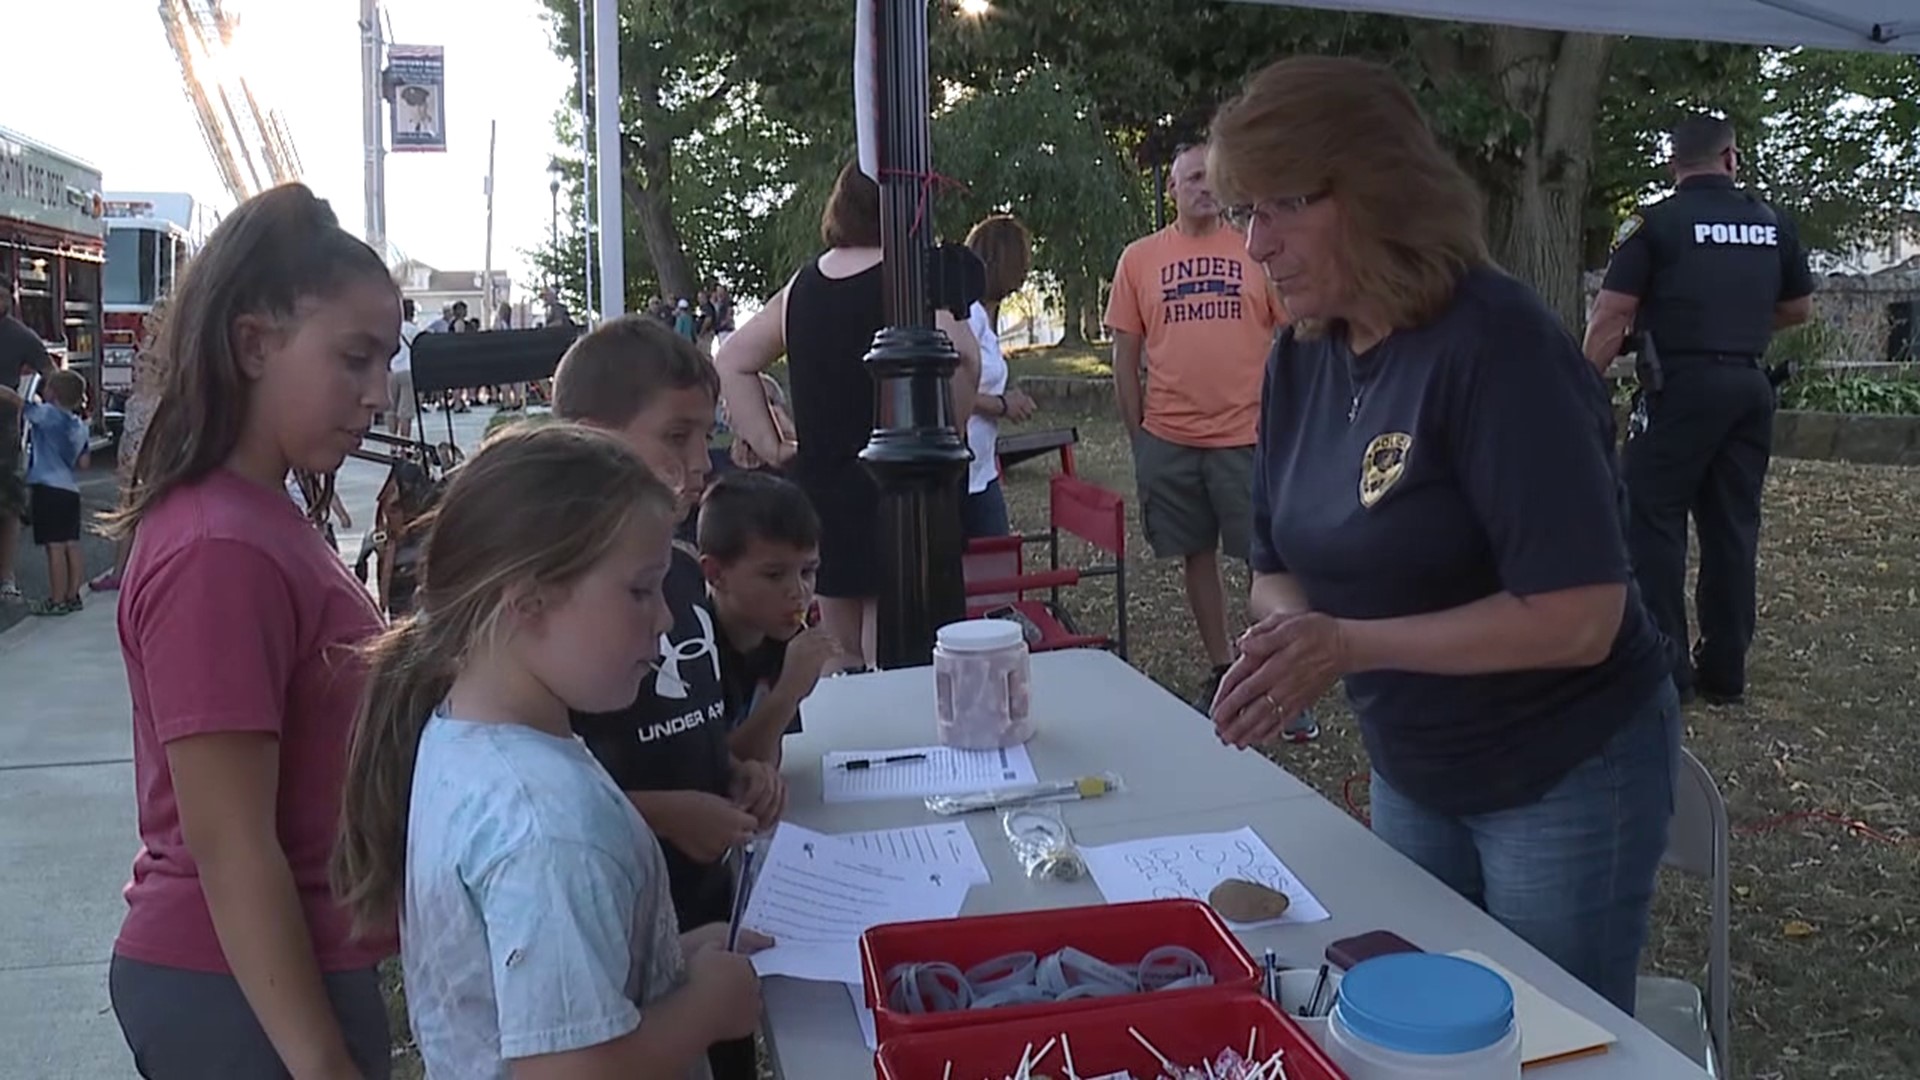 Tuesday night was National Night Out and folks in Carbon County gathered at Lehighton Borough Park to celebrate.